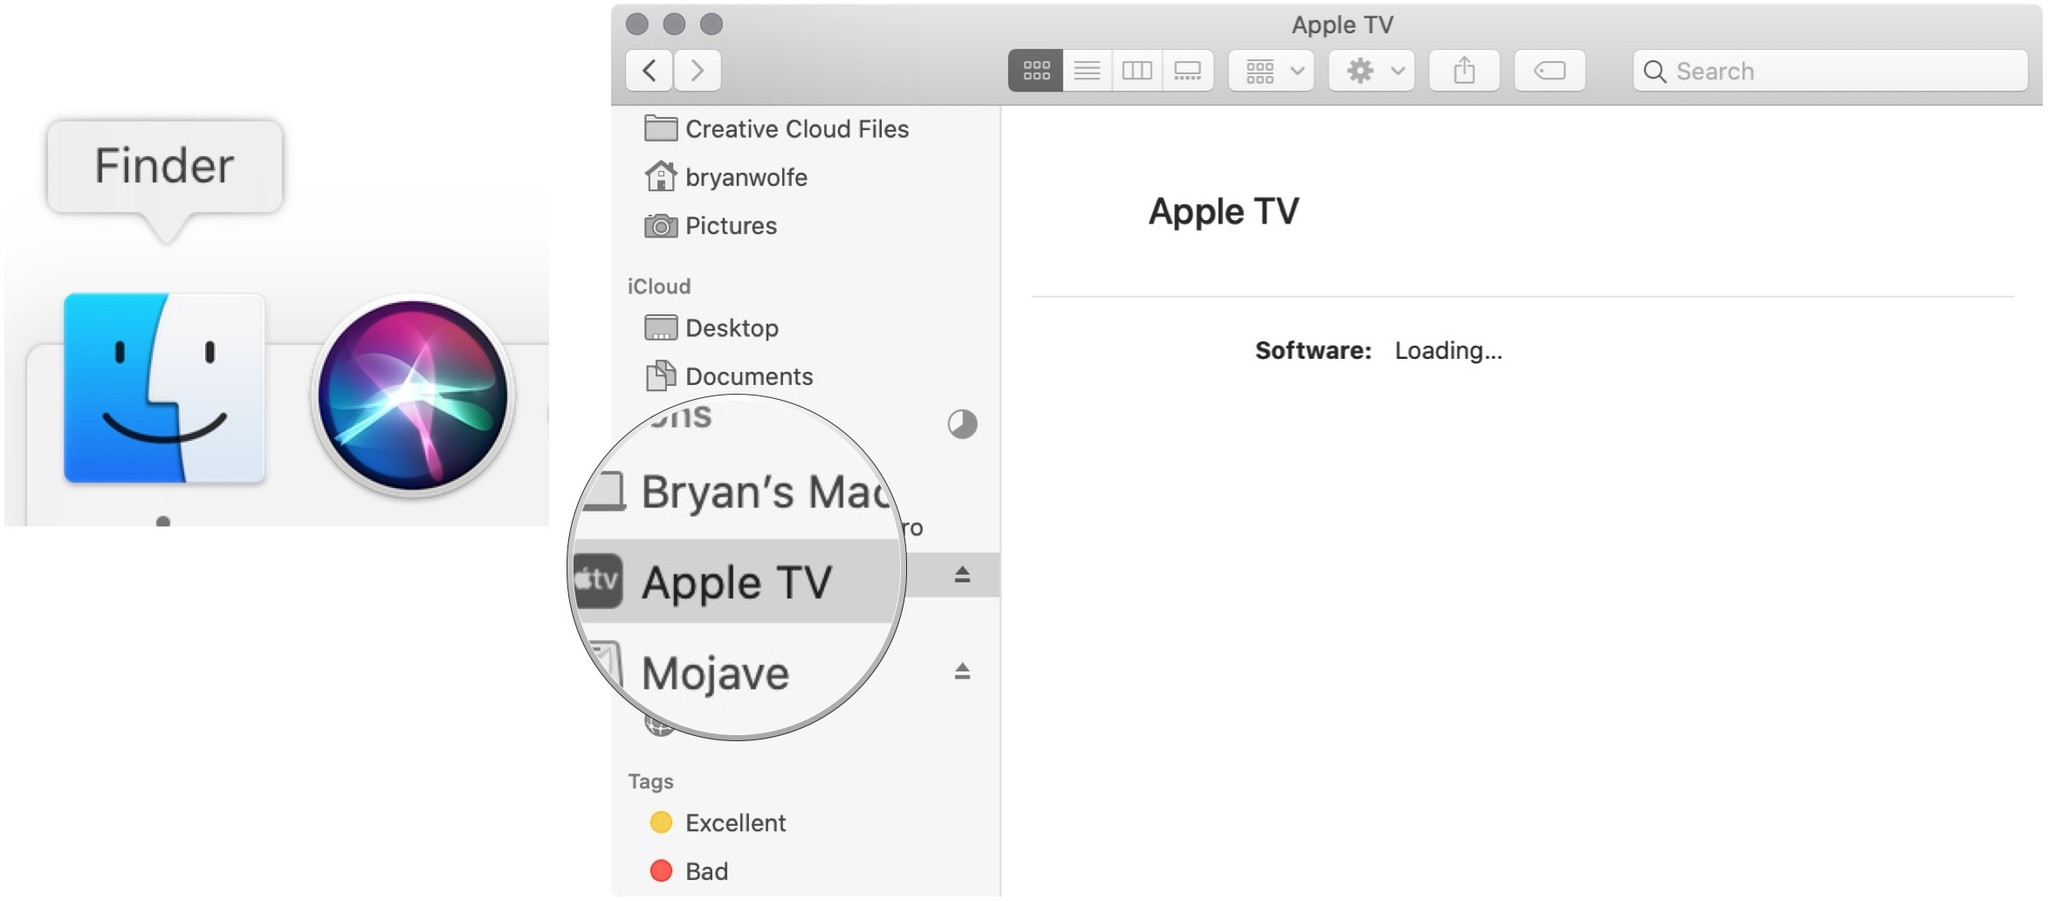 To downgrade your Apple TV HD, download the latest version of tvOS 13, connect the Apple TV with your USB-C cable, launch Finder. Select Apple TV under Locations in Finder. Click Restore Apple TV while holding down the Option key. Select the tvOS file you downloaded